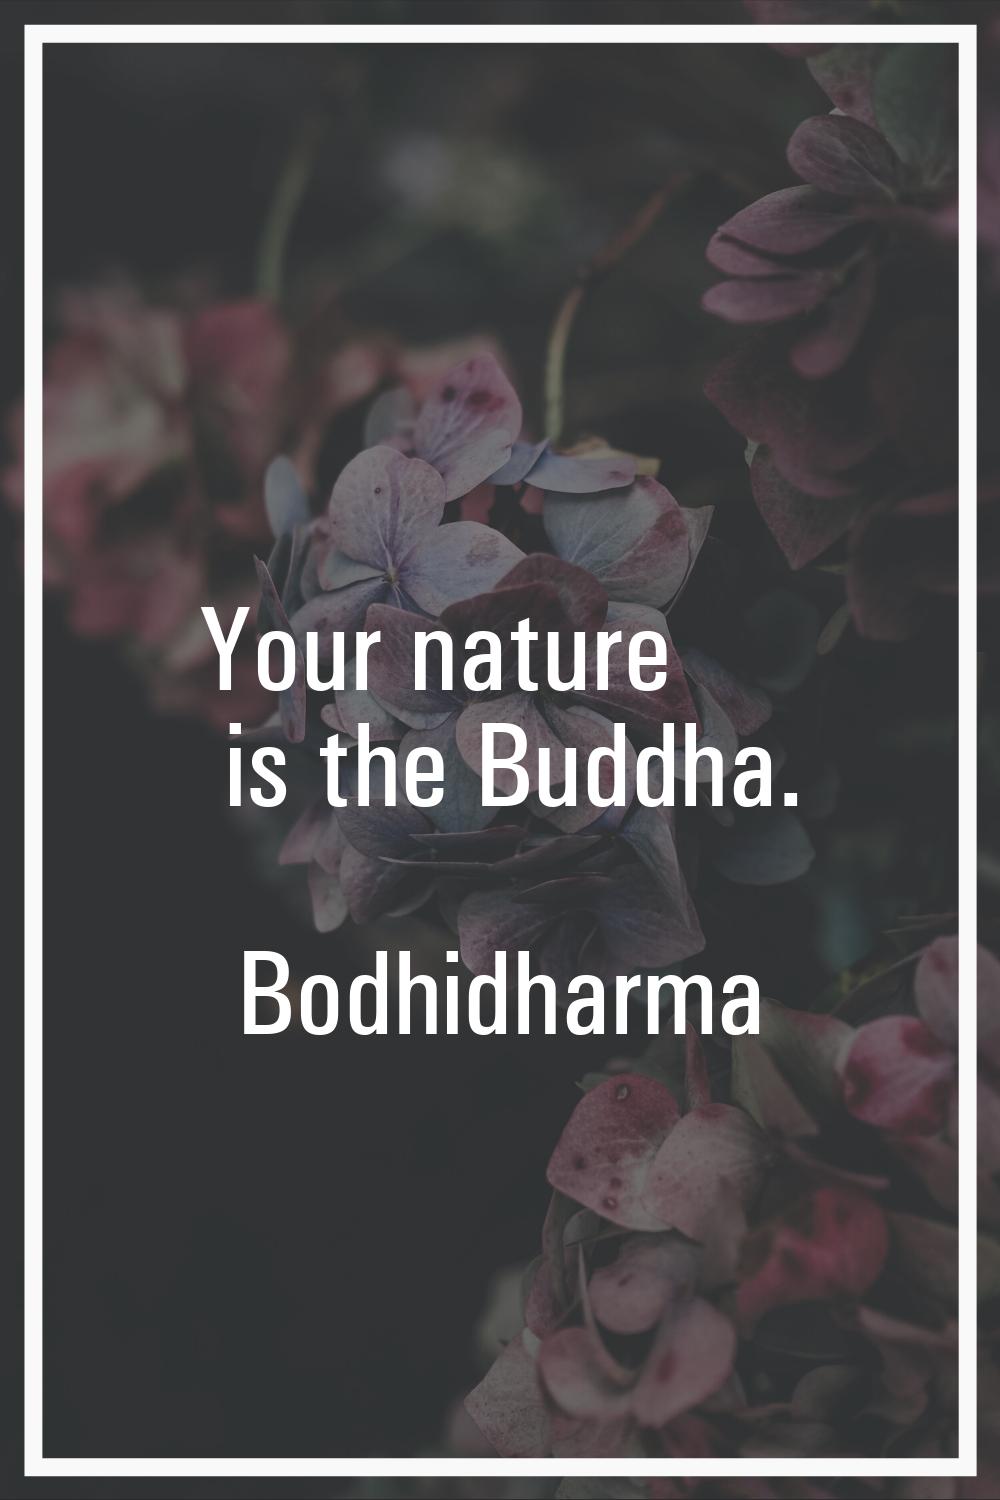 Your nature is the Buddha.